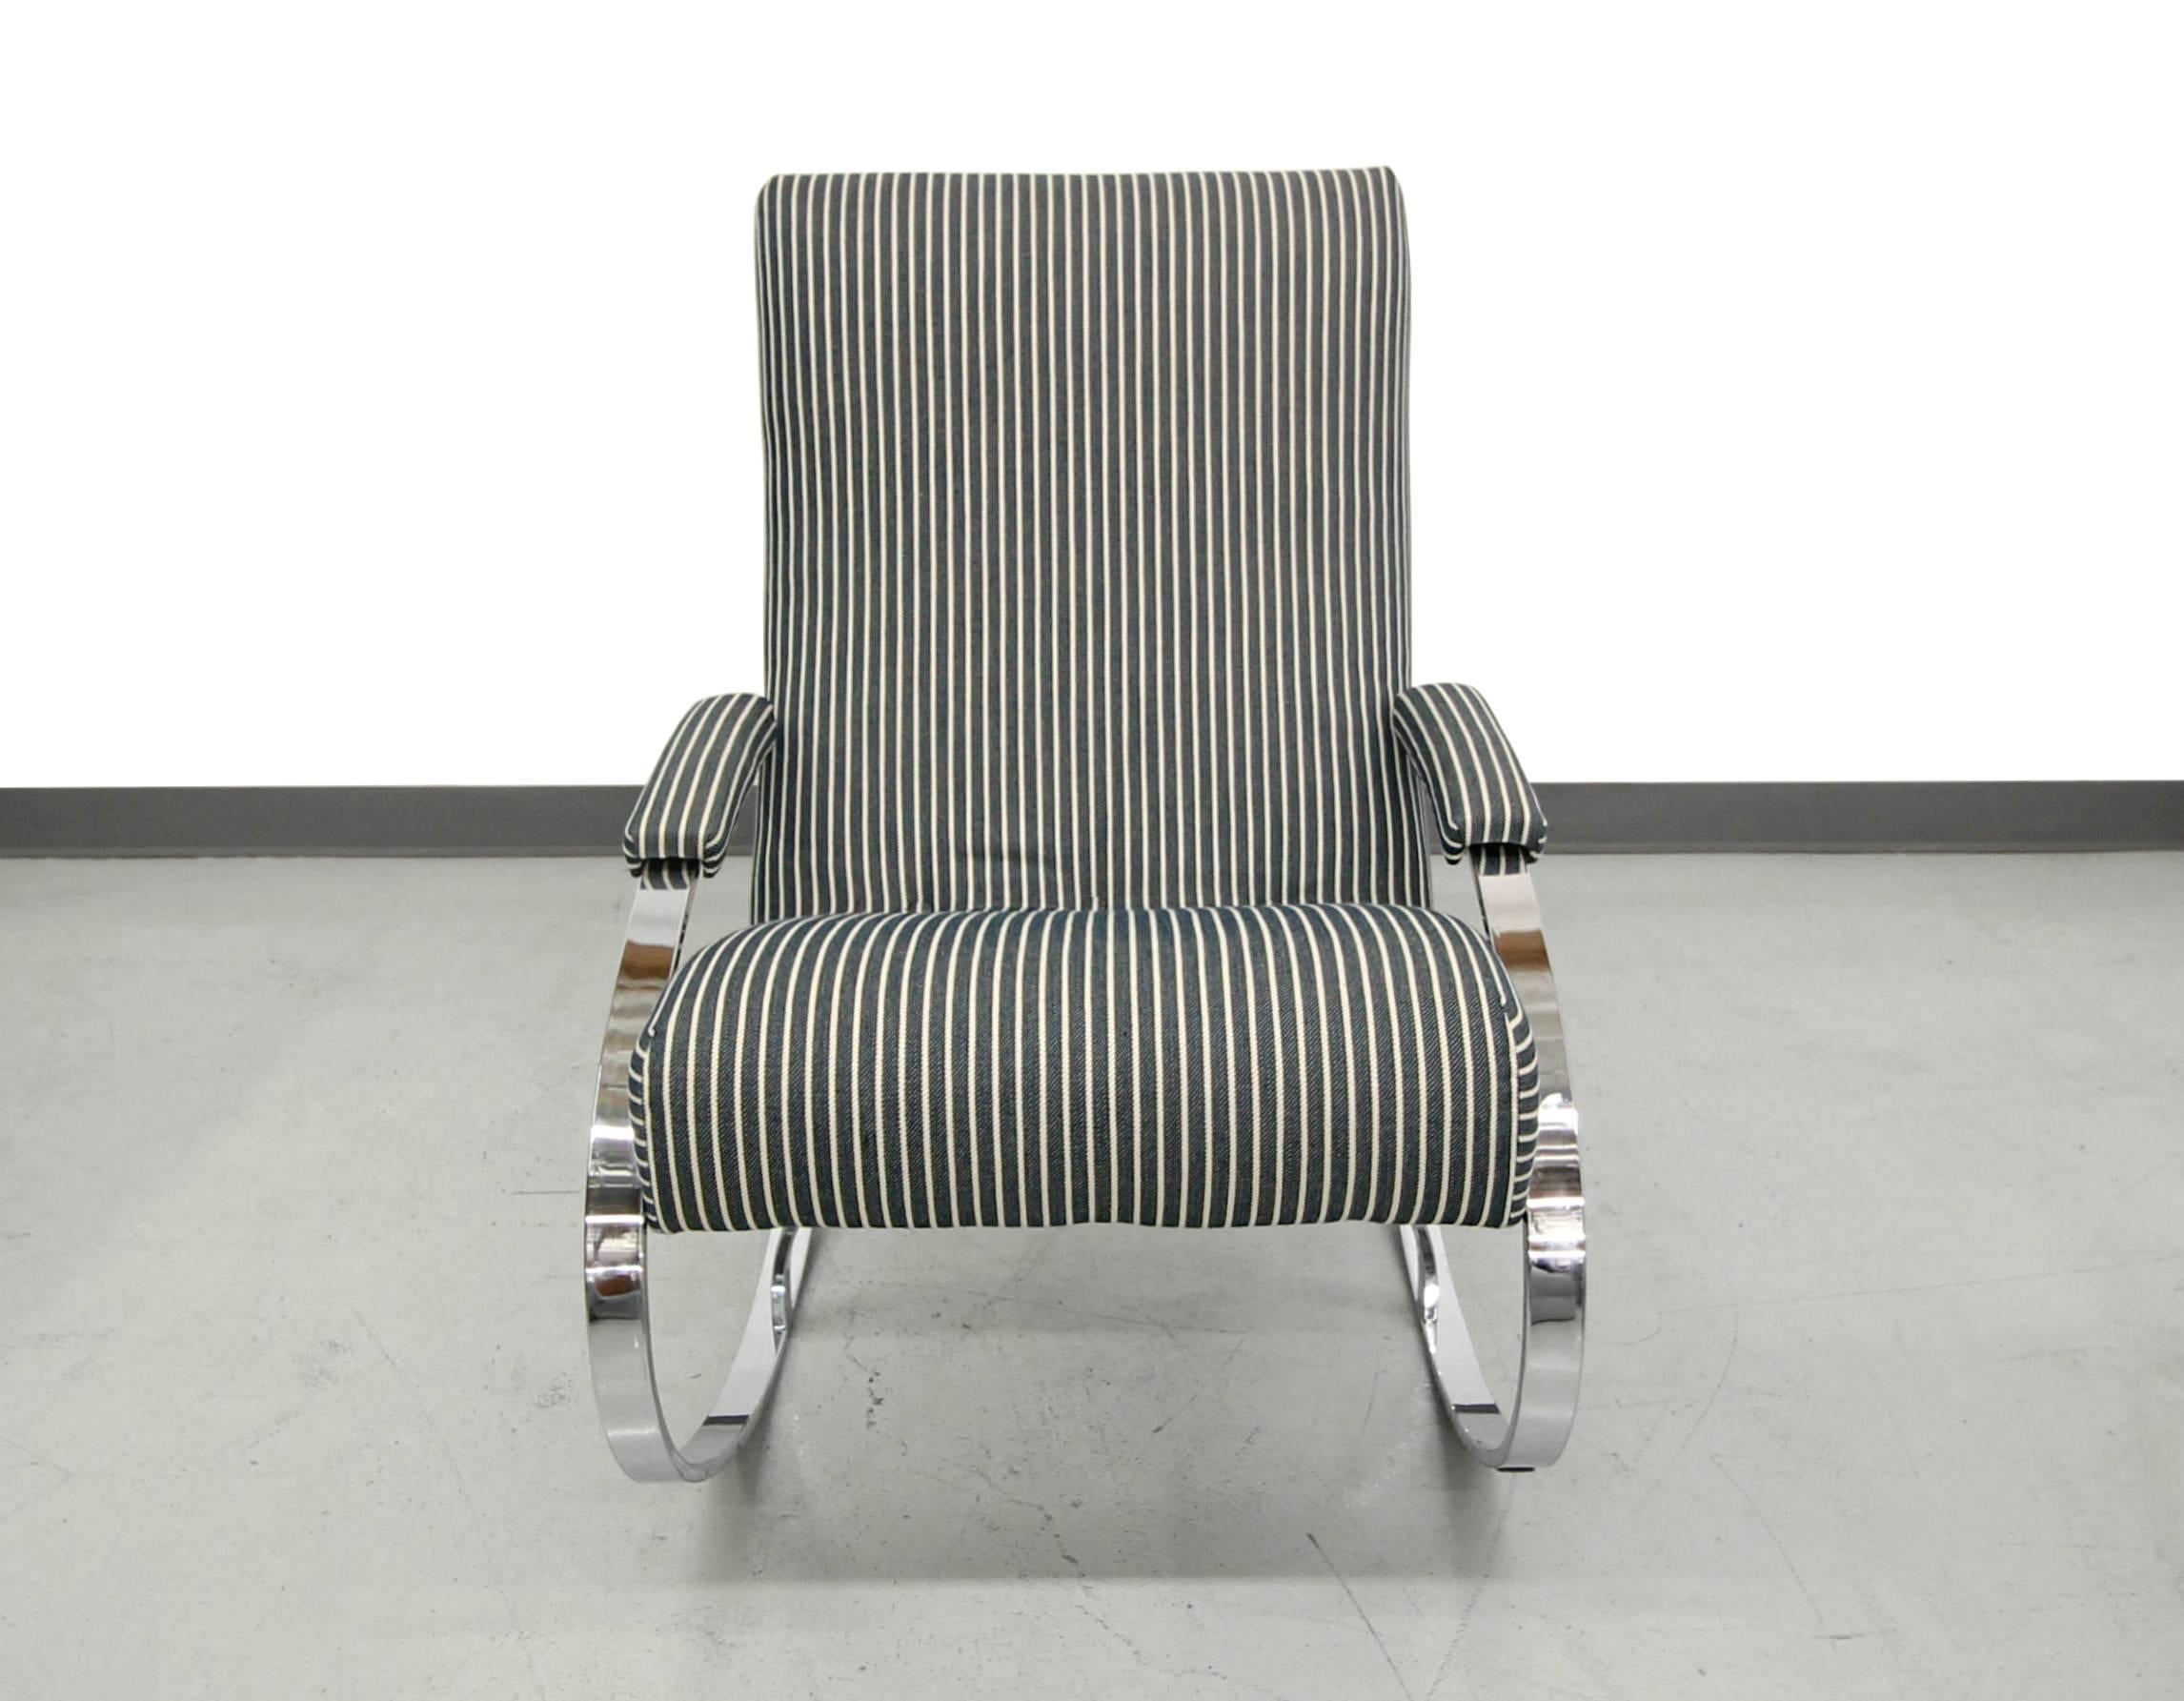 Chrome rocking chair by Milo Baughman. Perfect lounge or nursery chair. Classic modern style, great in any room. 

We reupholstered the chair with all new foam and fabric and the chrome shows little to no wear or patina.